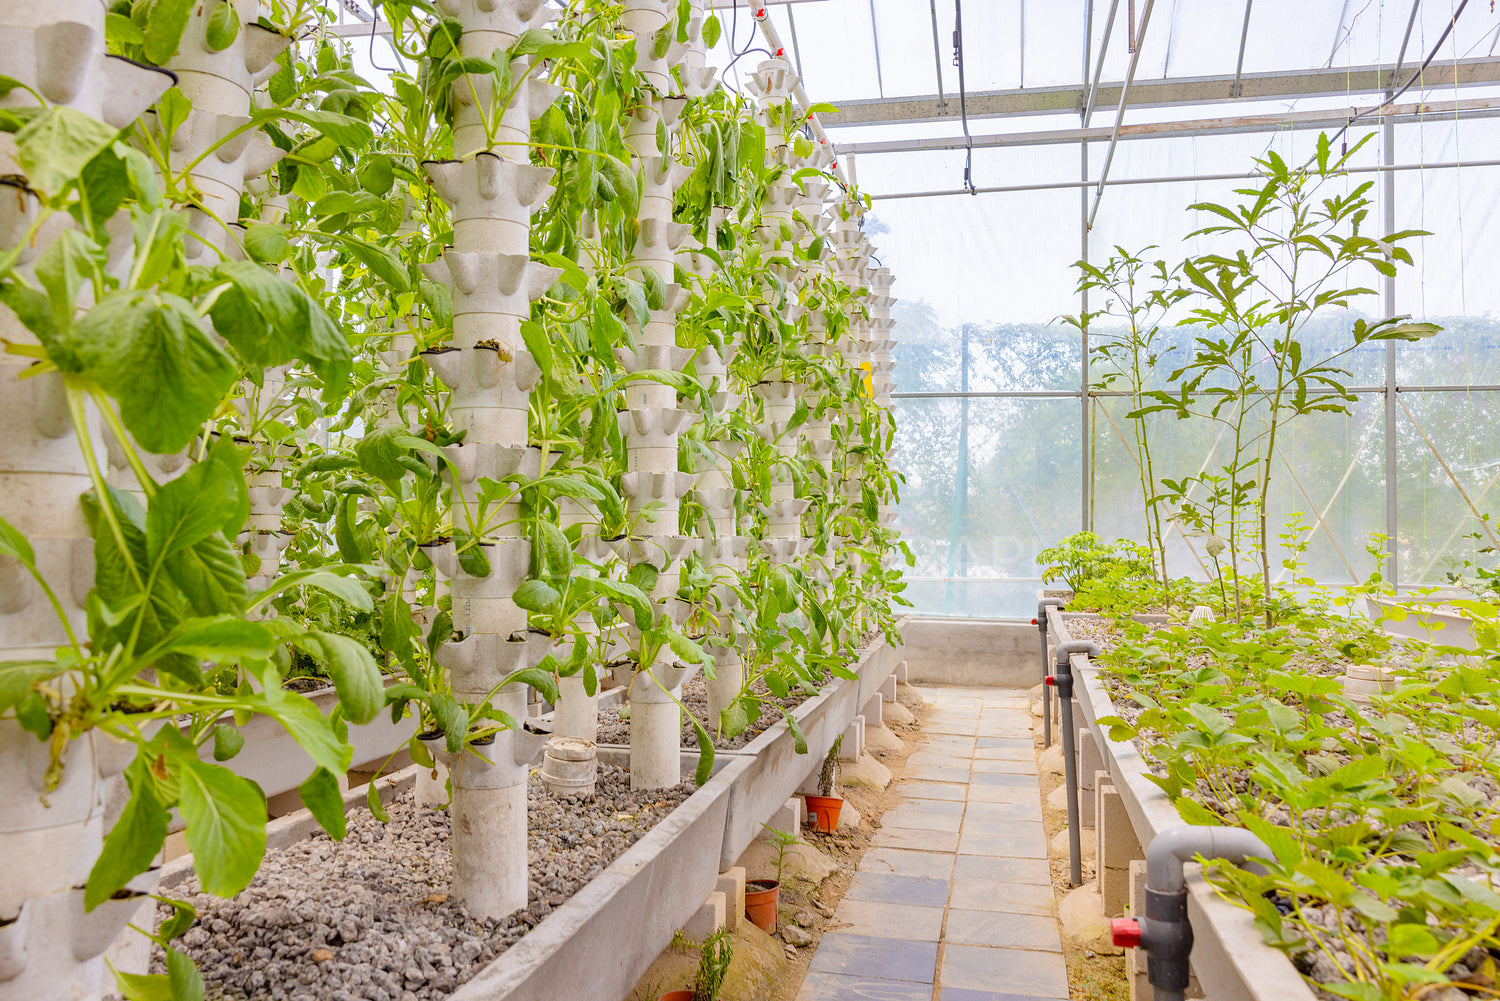 Green Plants in Hydroponic Vertical Columns in a Greenhouse